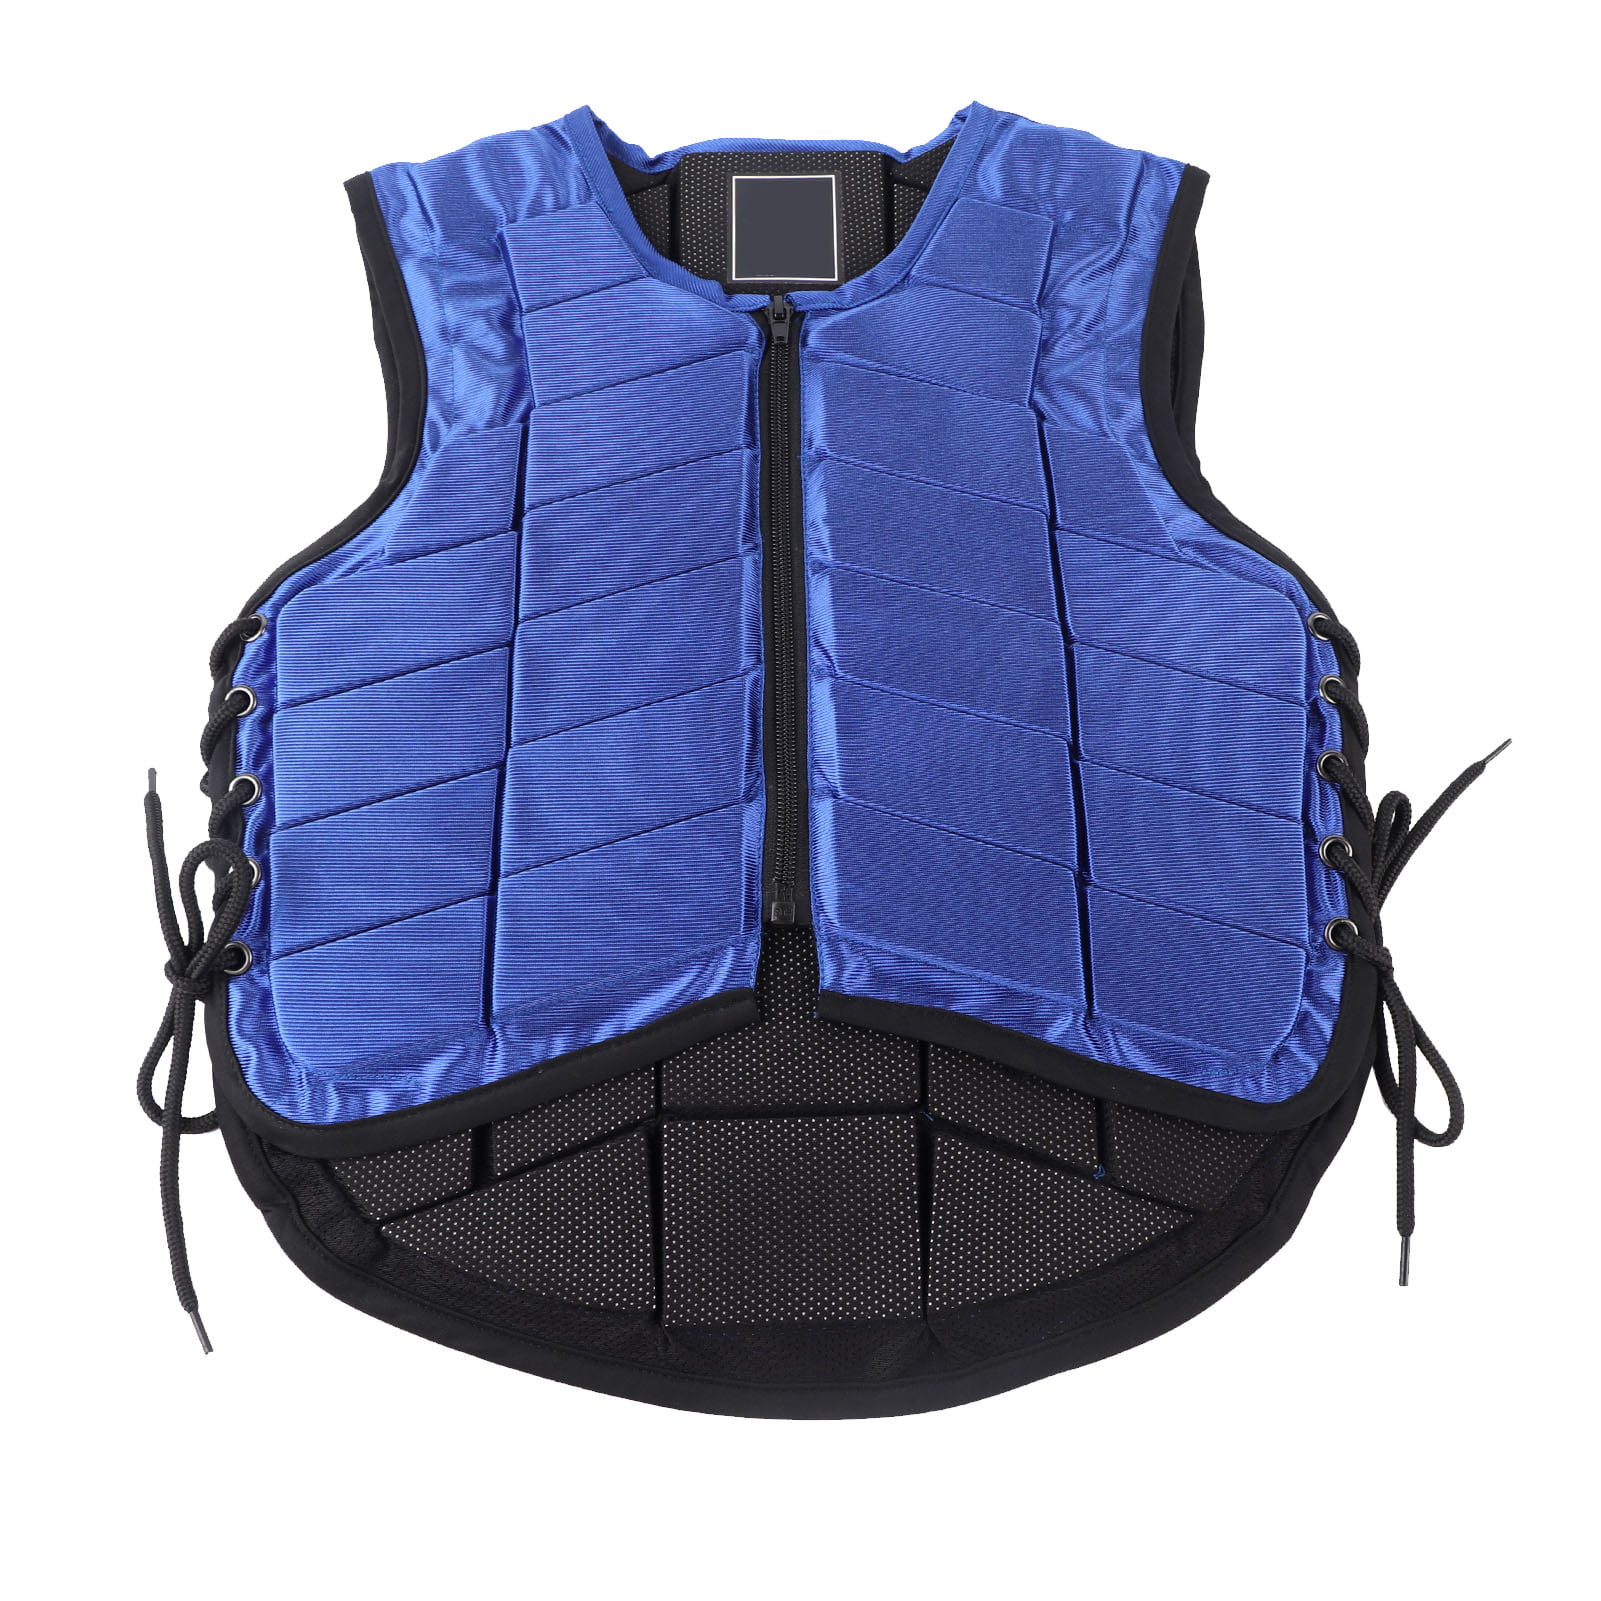 Equestrian Protective Vest Kids Equestrian Vest Unisex Shock Absorption for Bull Riding for Horse Riding Training 